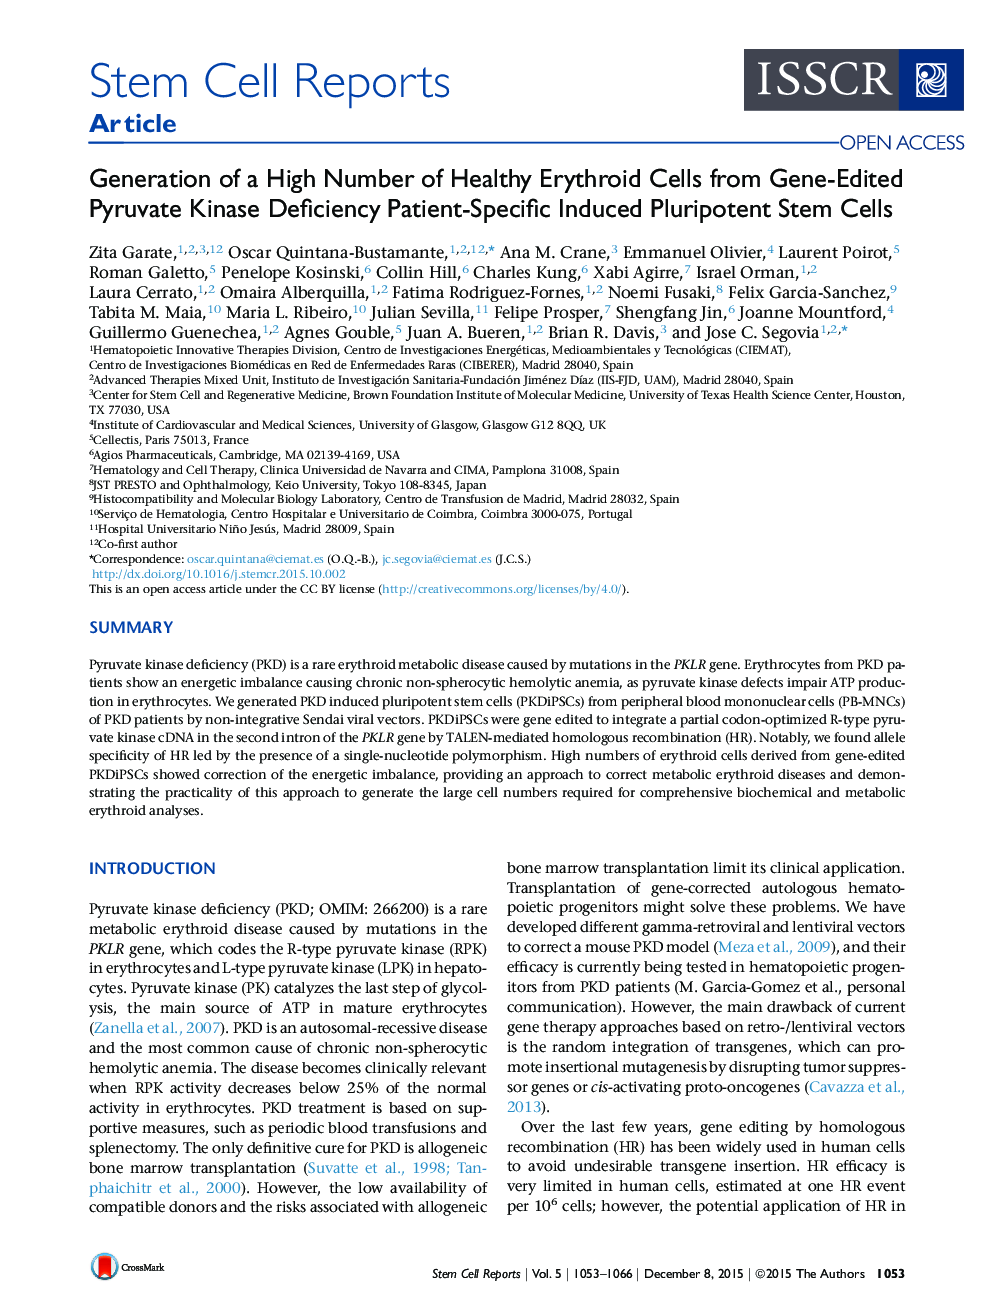 Generation of a High Number of Healthy Erythroid Cells from Gene-Edited Pyruvate Kinase Deficiency Patient-Specific Induced Pluripotent Stem Cells 